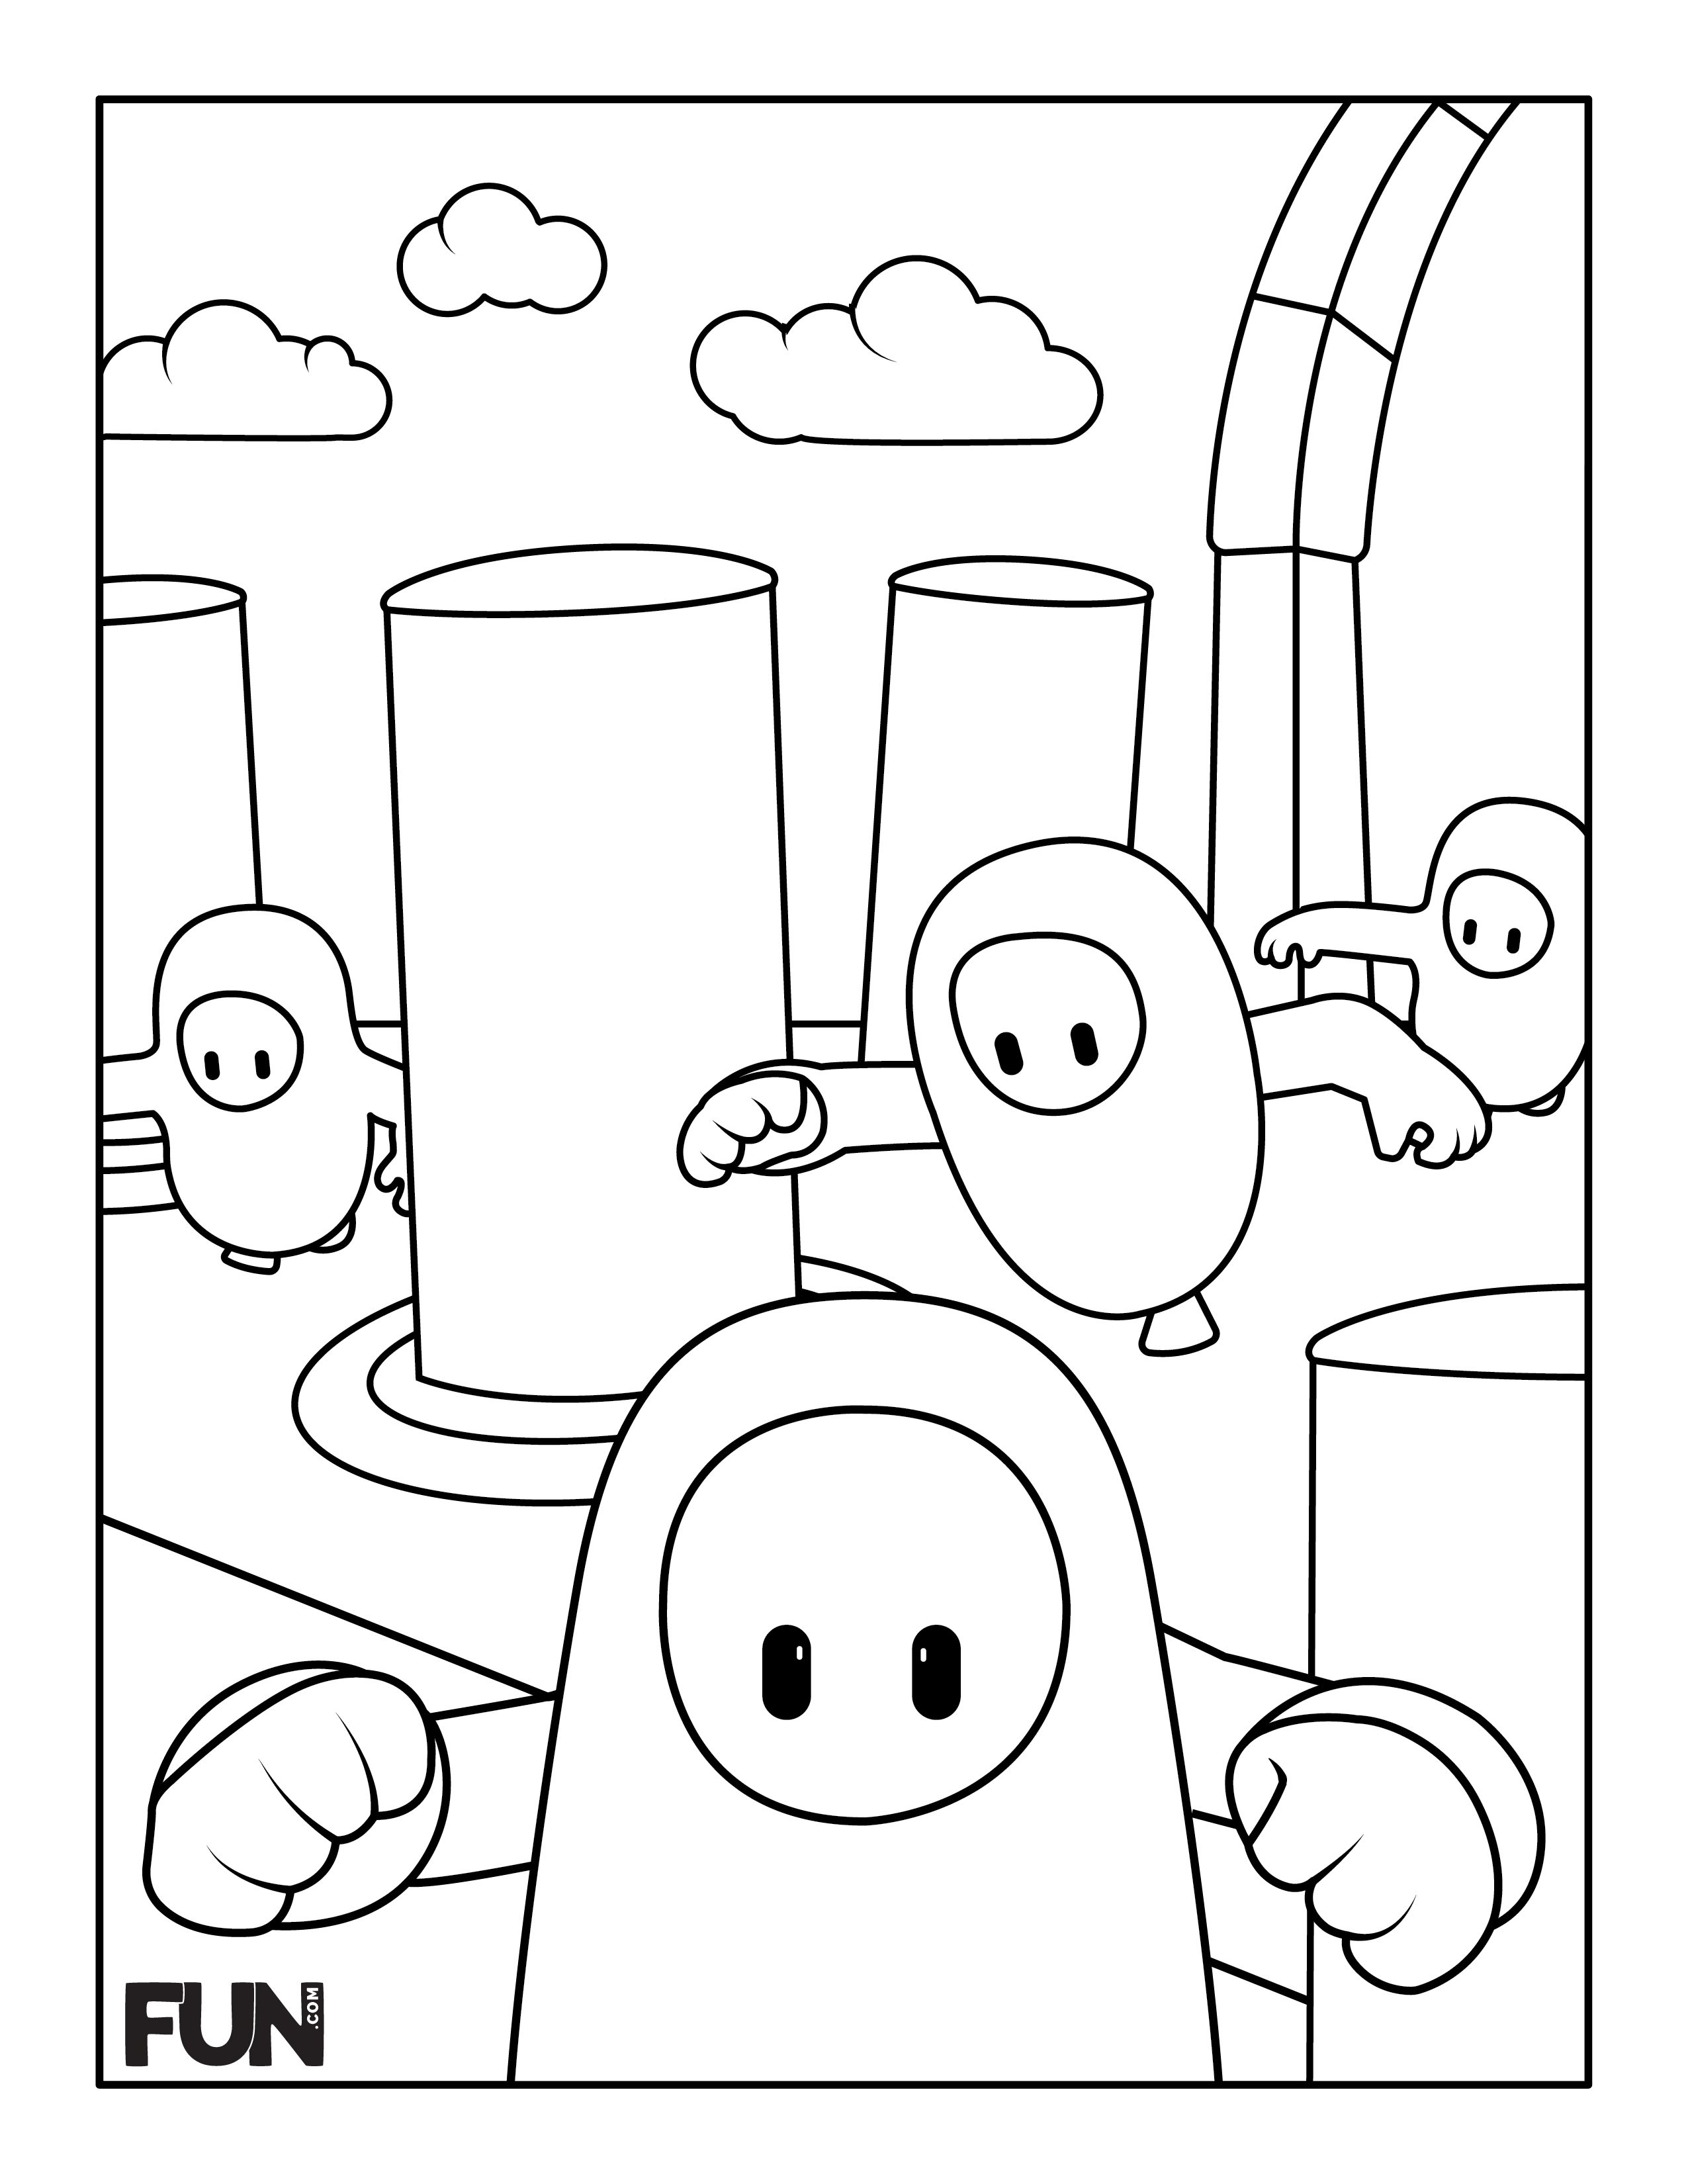 Free Video Game Coloring Pages for a Pixel-Perfect Day [Printables] -  FUN.com Blog